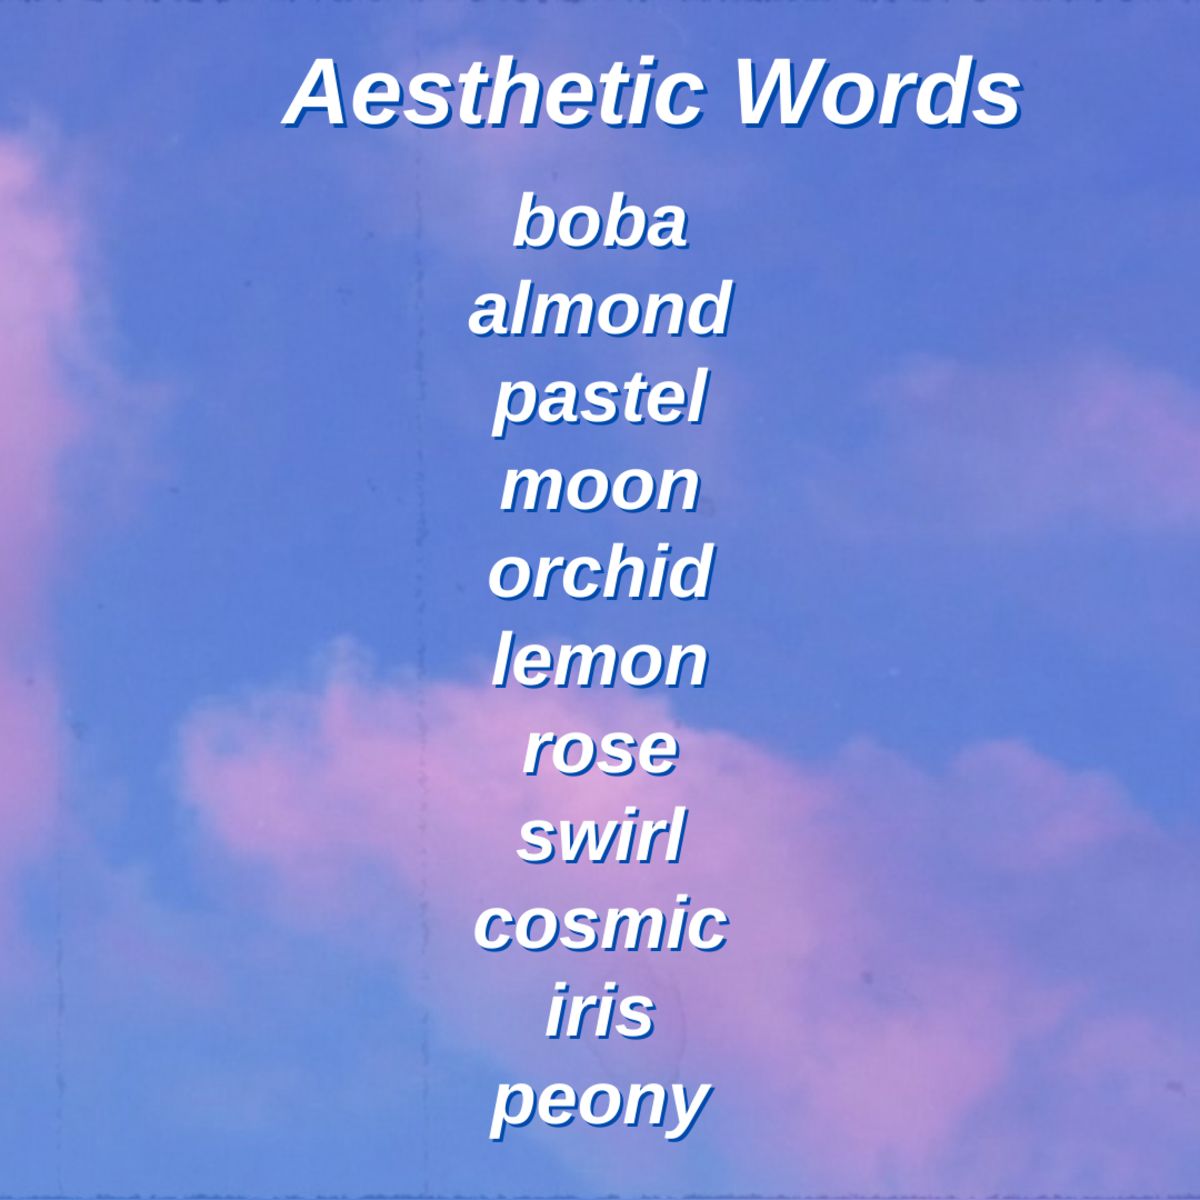 Here are some aesthetic word ideas to help you for your brainstorming sessions!